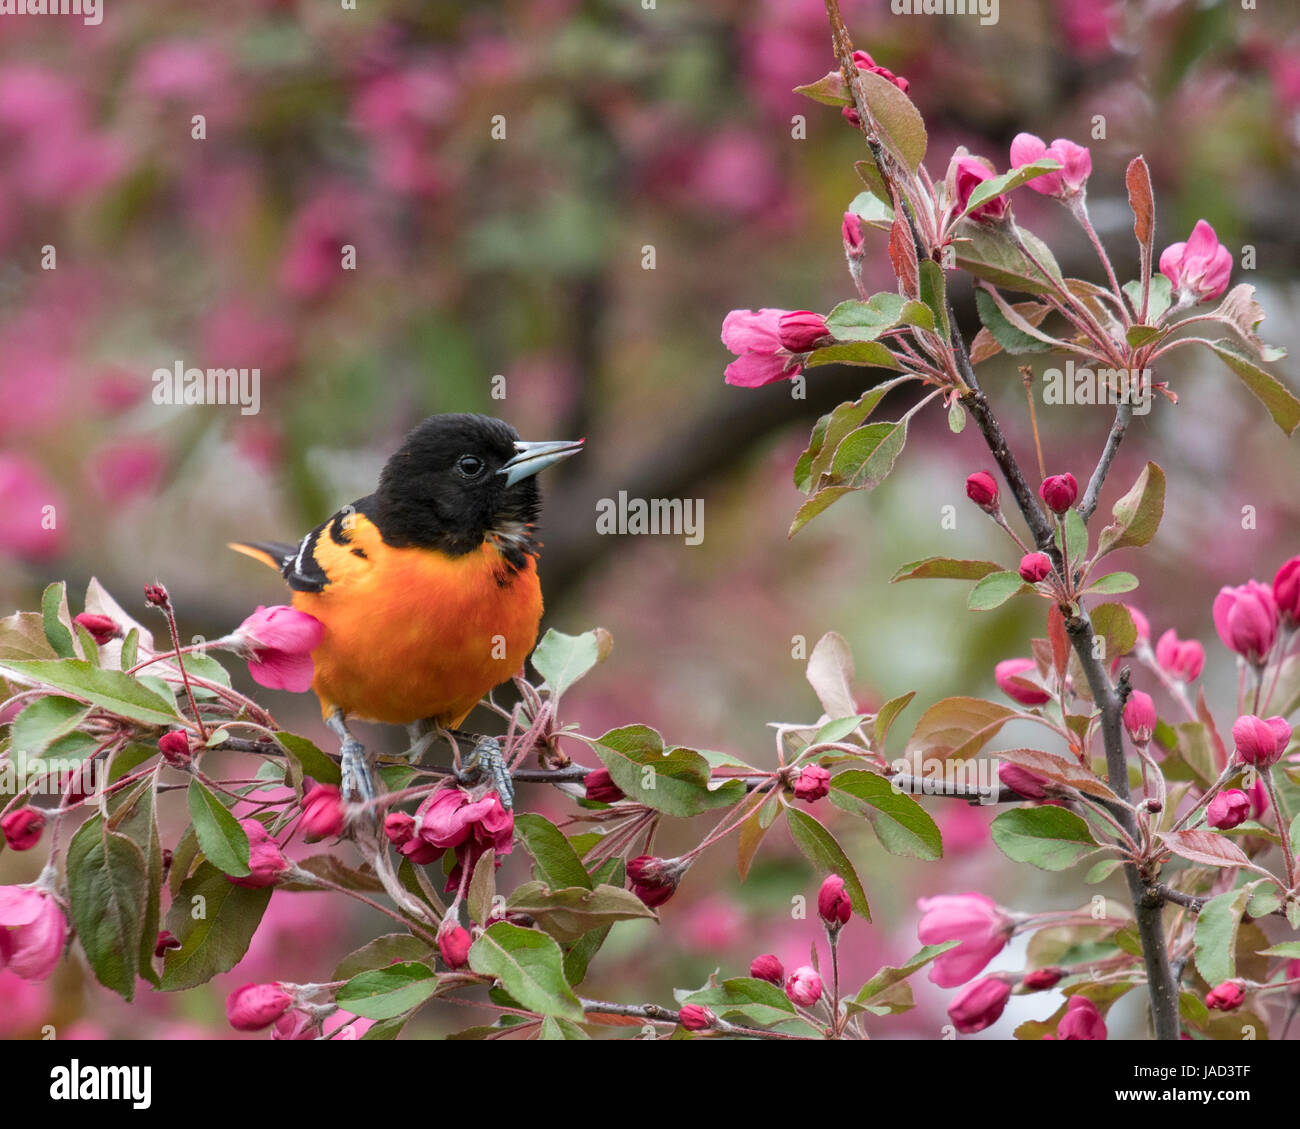 Baltimore Orioles (Icterus galbula) perches on a pink flowering tree branch Stock Photo